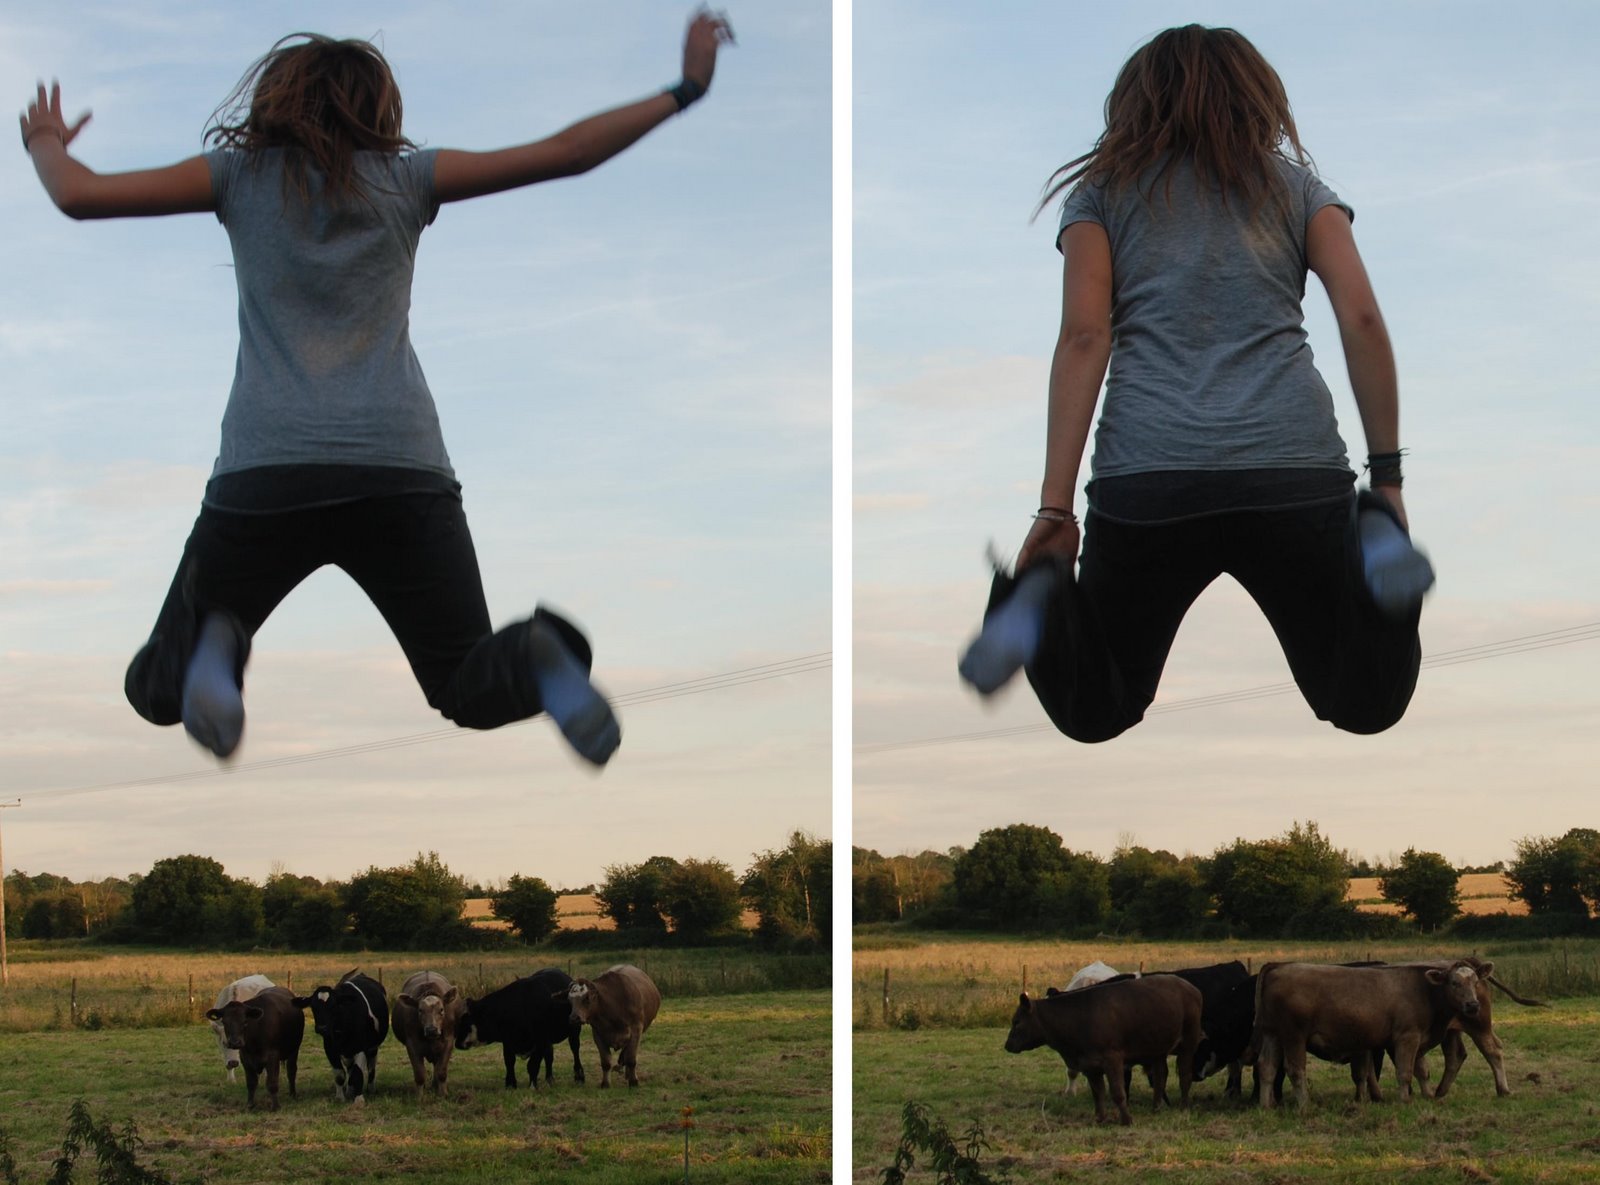 [jumped+over+the+cows.jpg]